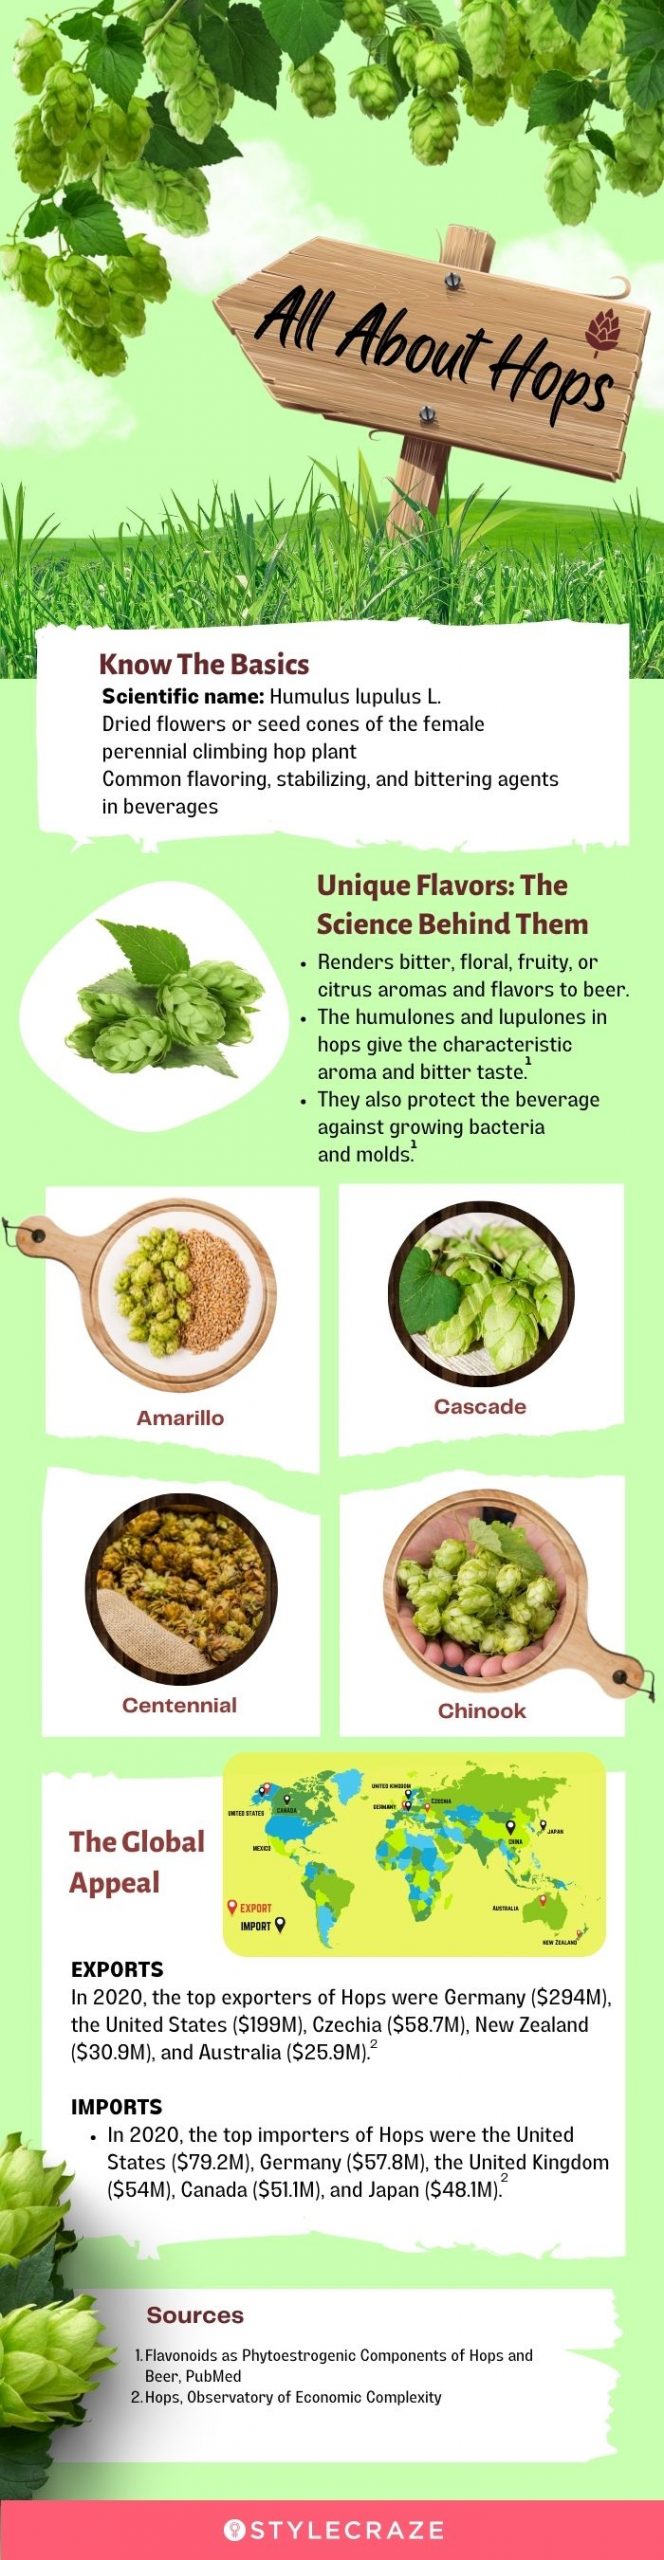 all about hops [infographic]